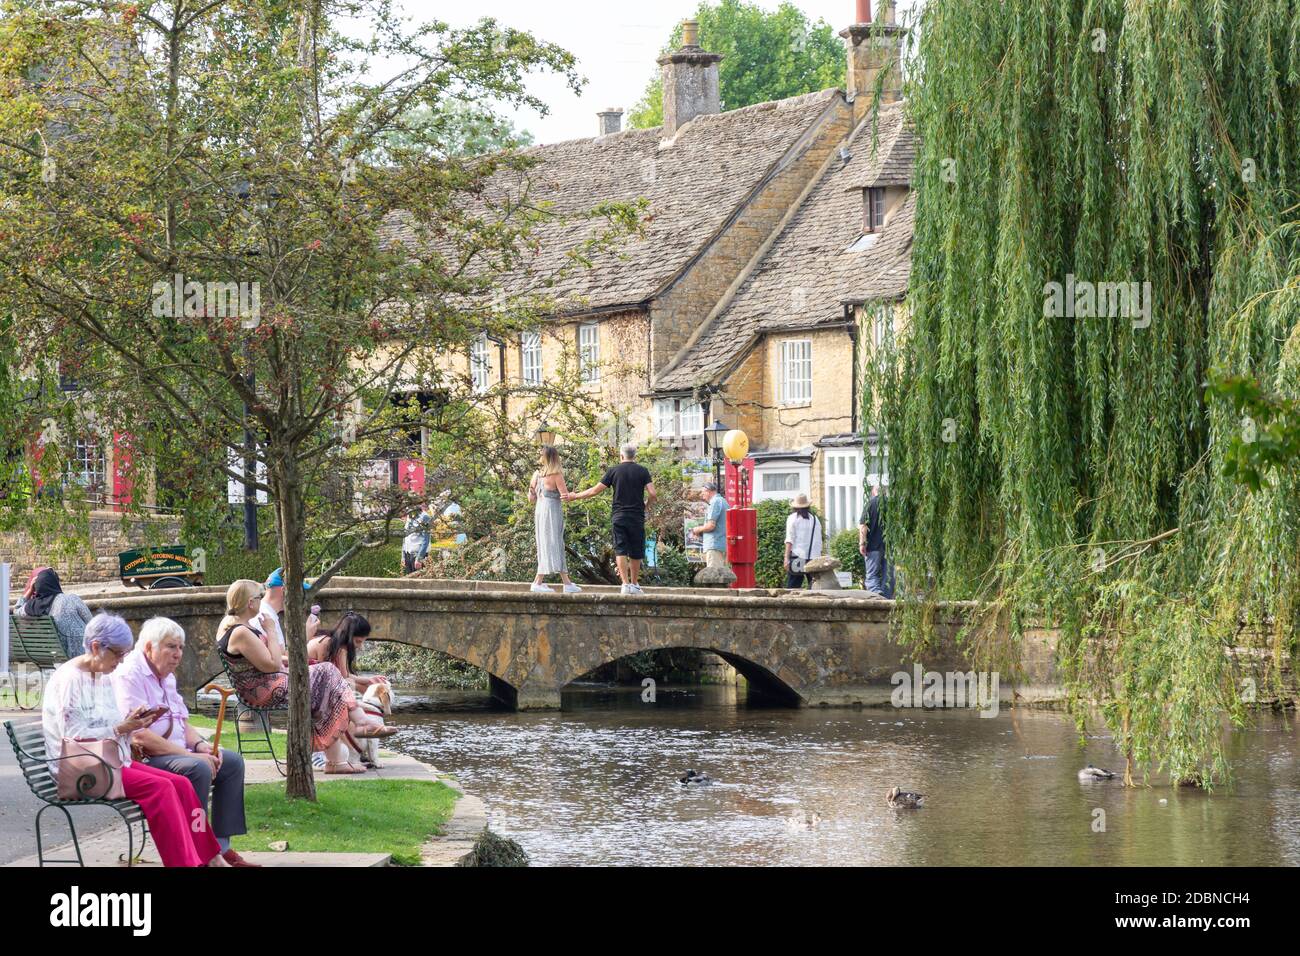 Stone bridge and Cotswold Motoring Museum over River Windrush, Bourton-on-the-Water, Gloucestershire, England, United Kingdom Stock Photo